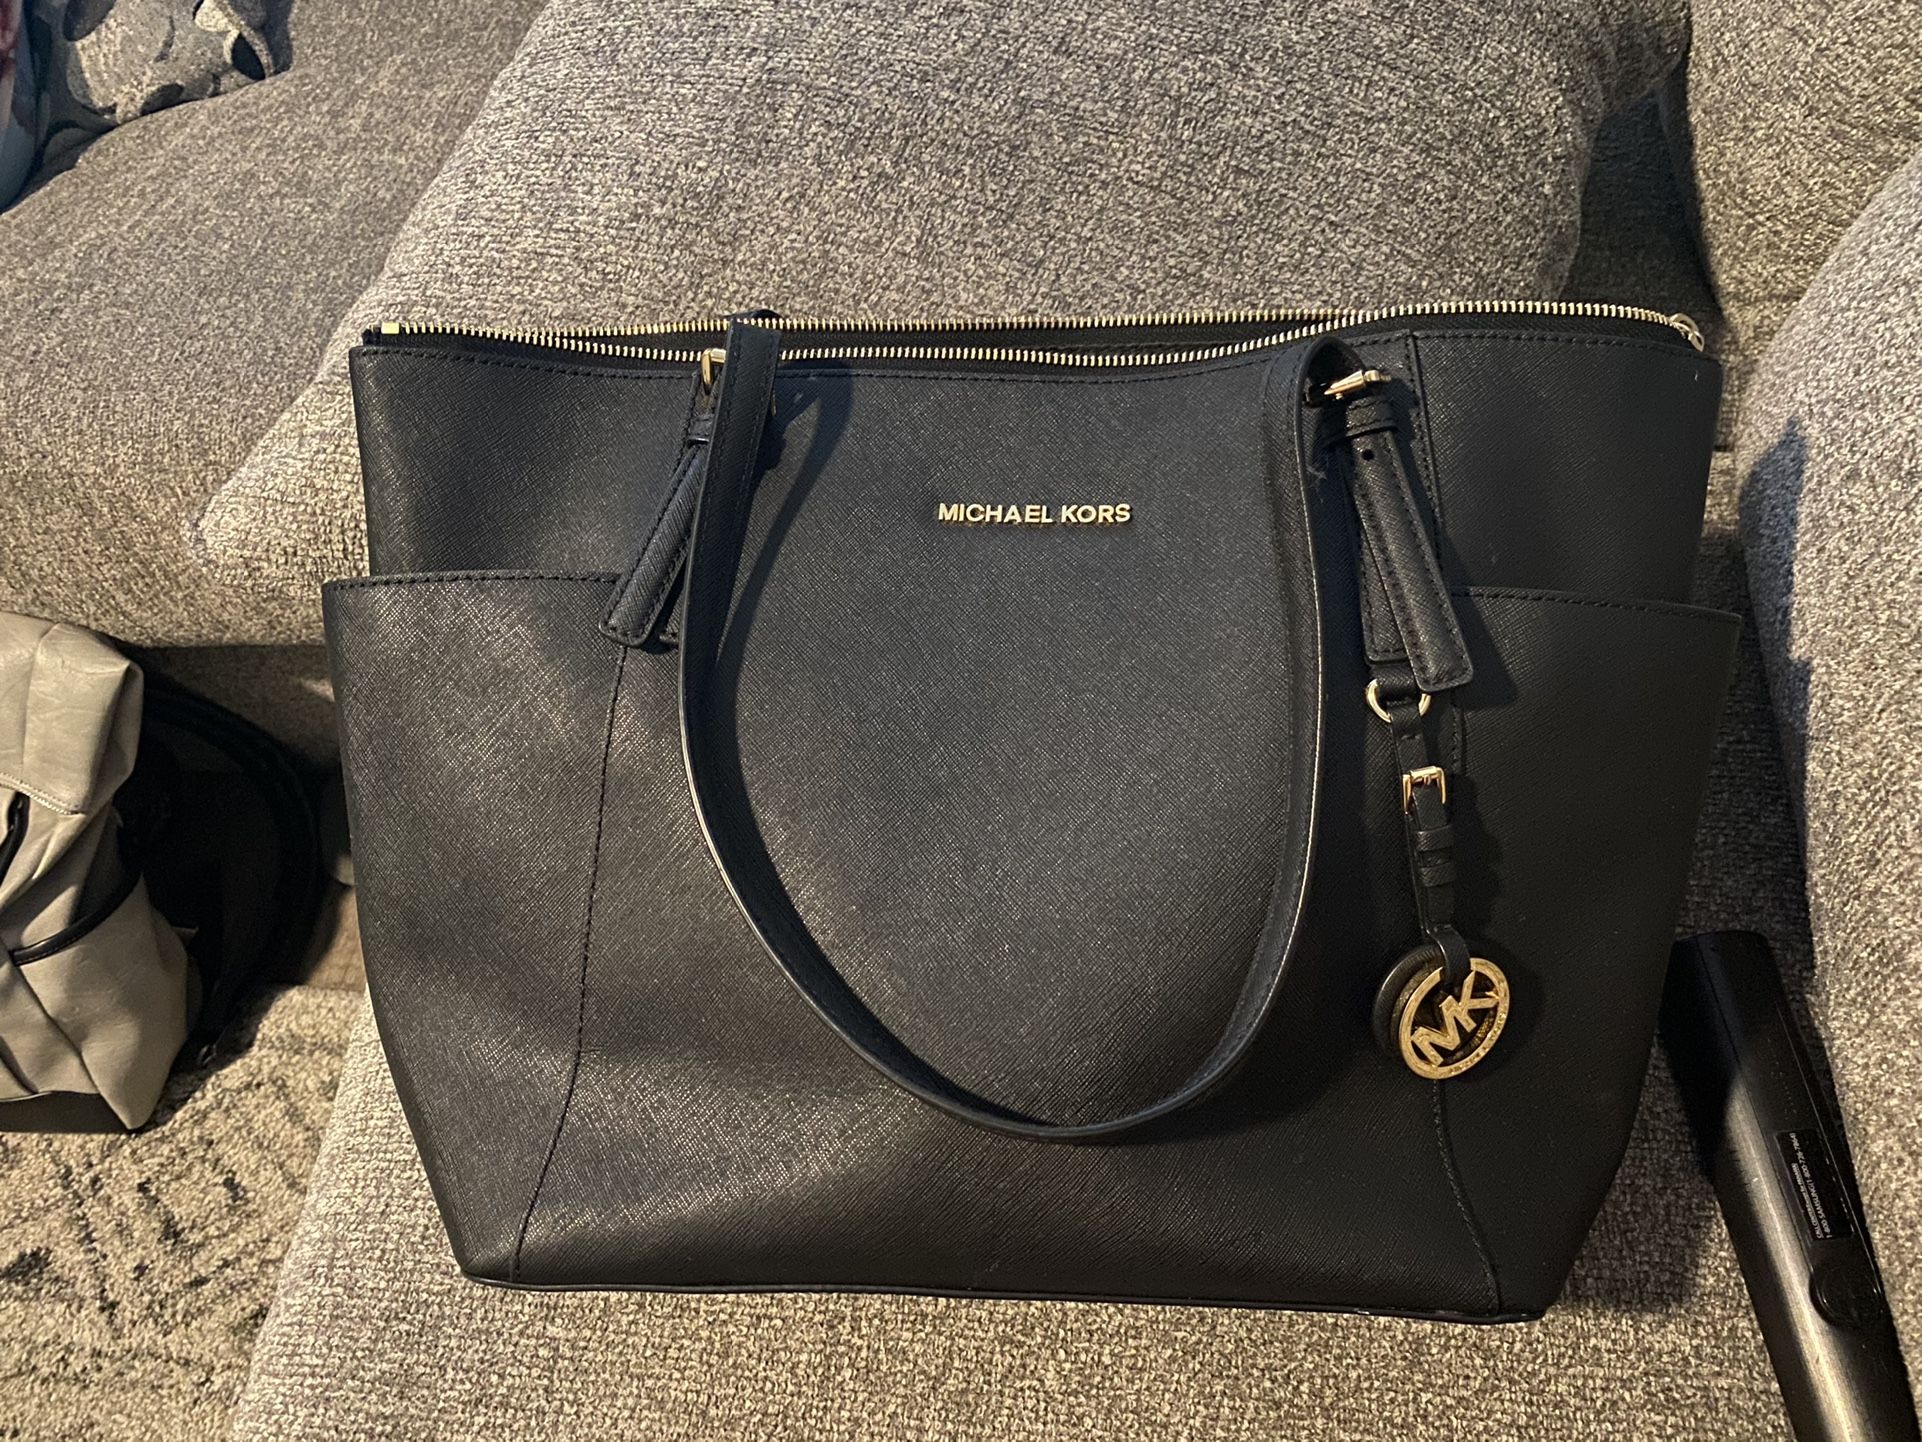 Michael Kors Leather Tote.